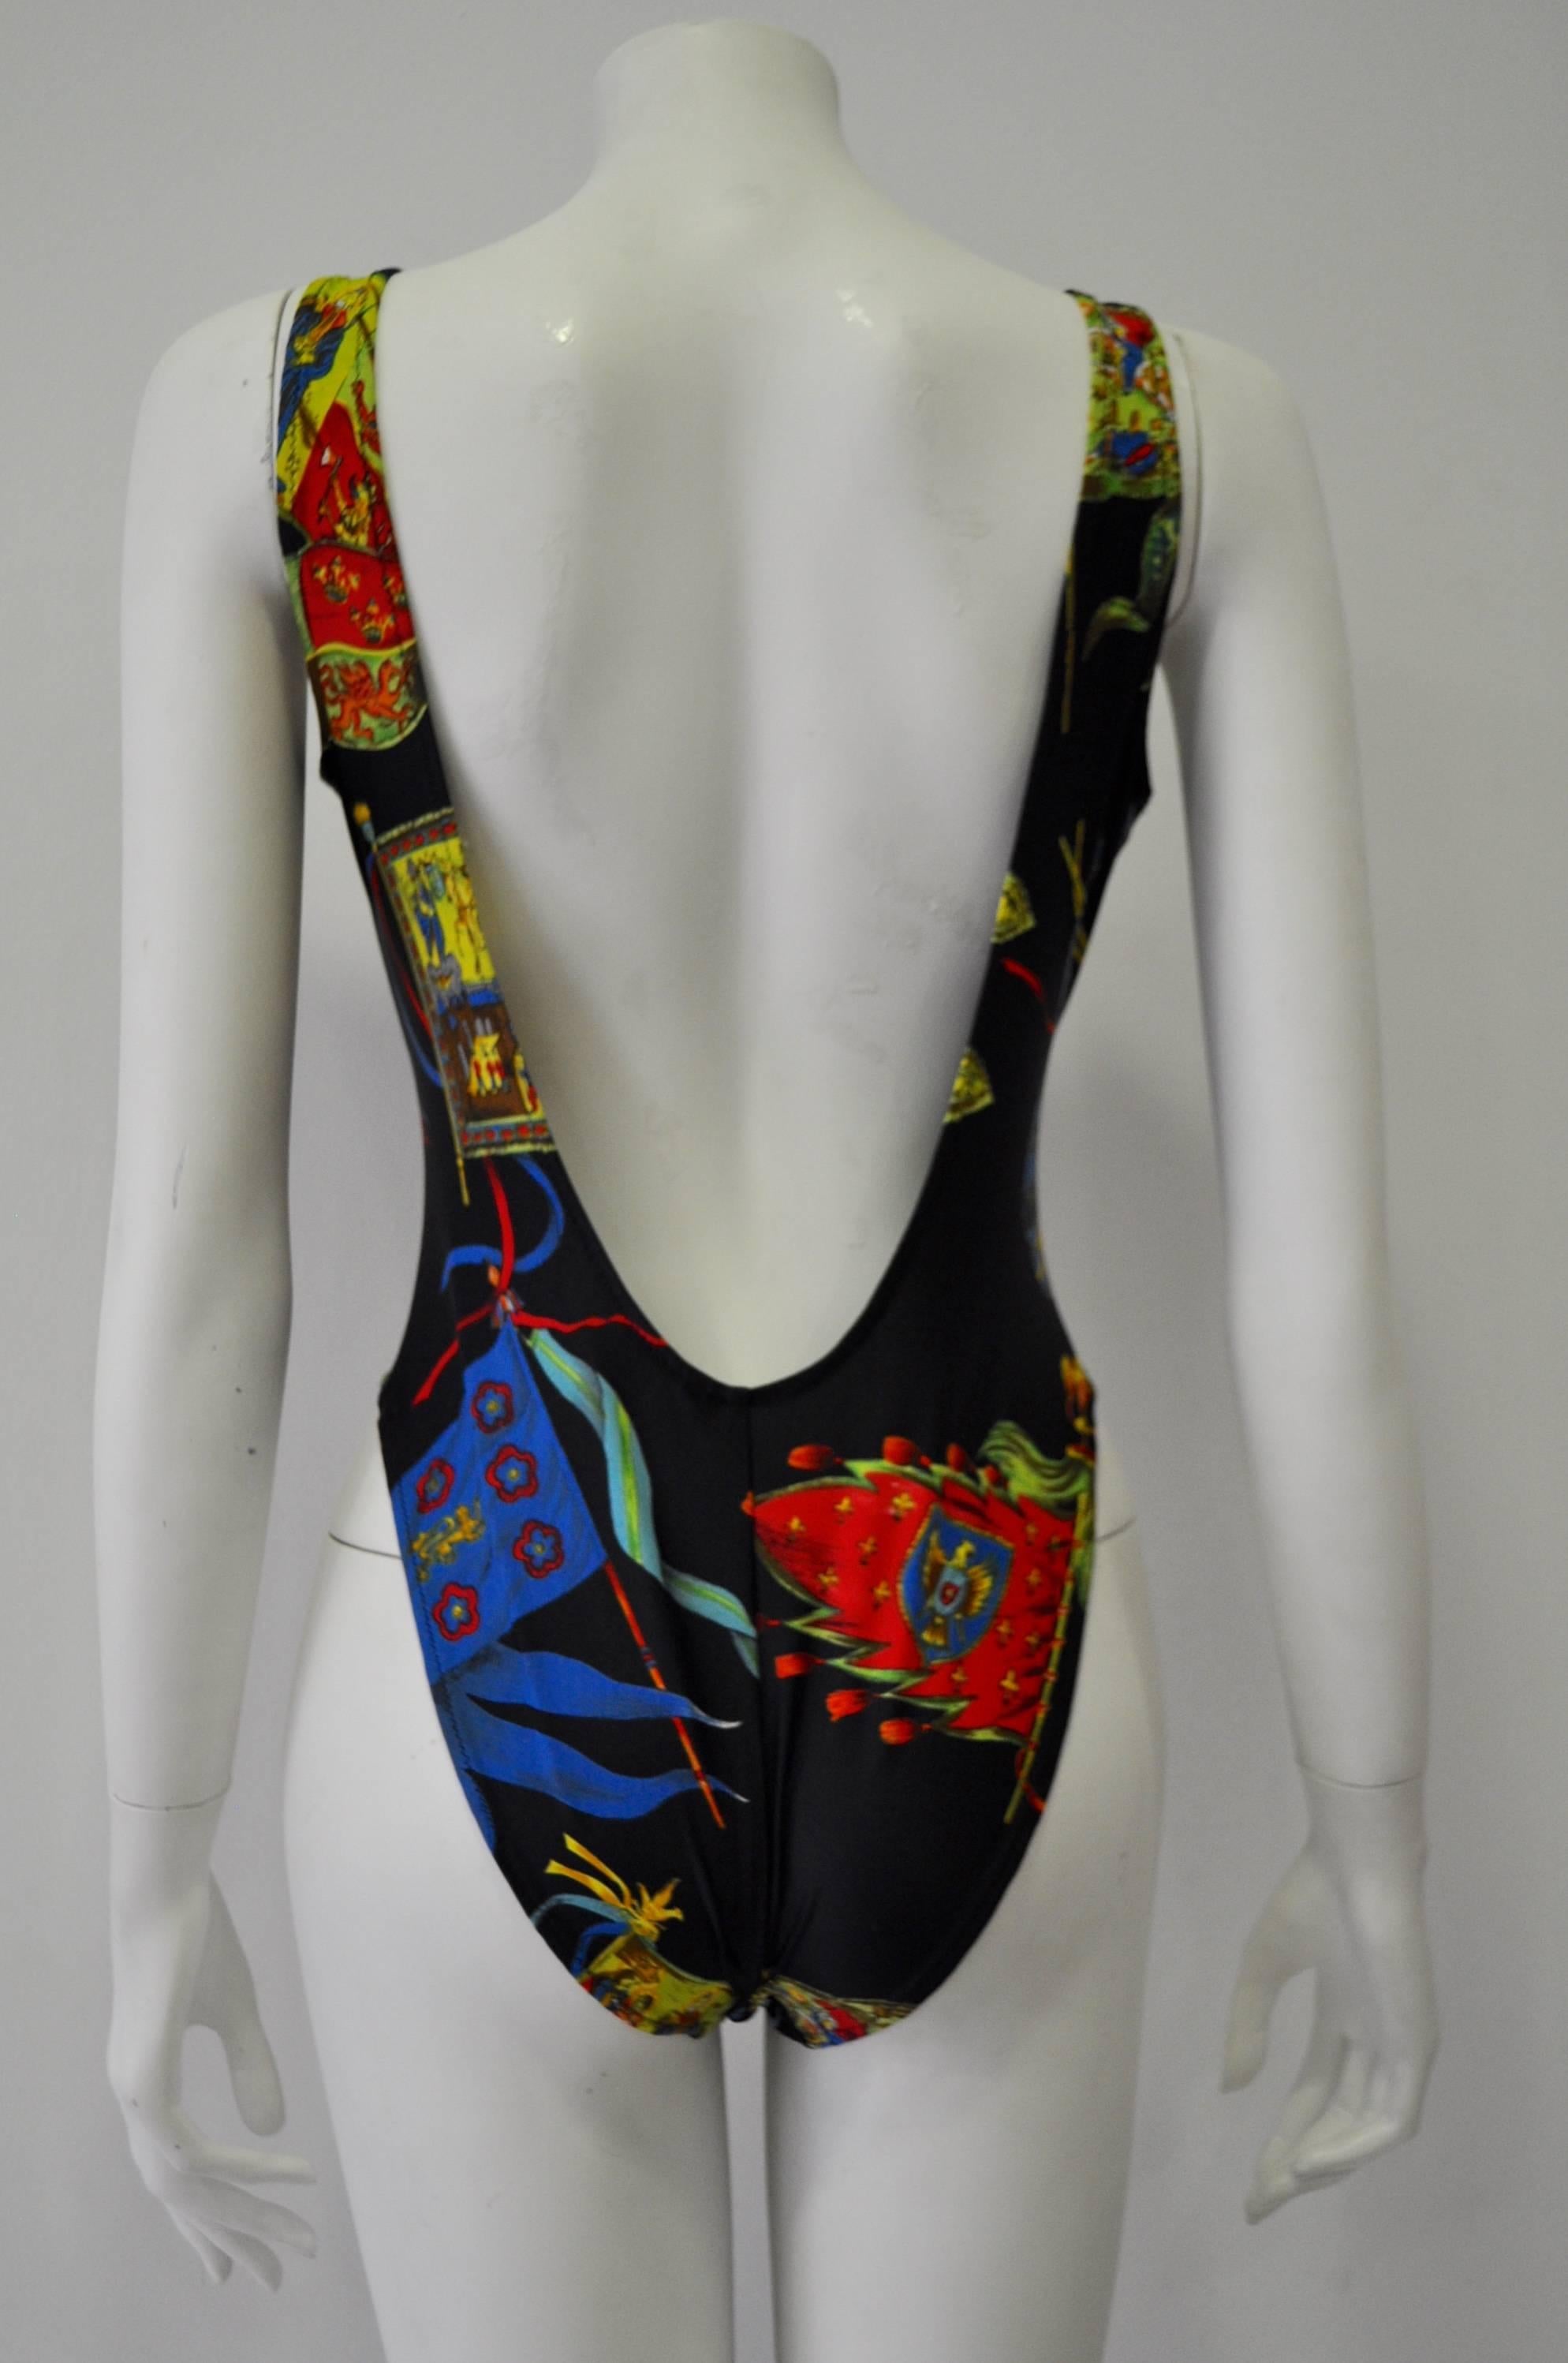 Gianni Versace Istante Coat of Arms Swimsuit For Sale 1